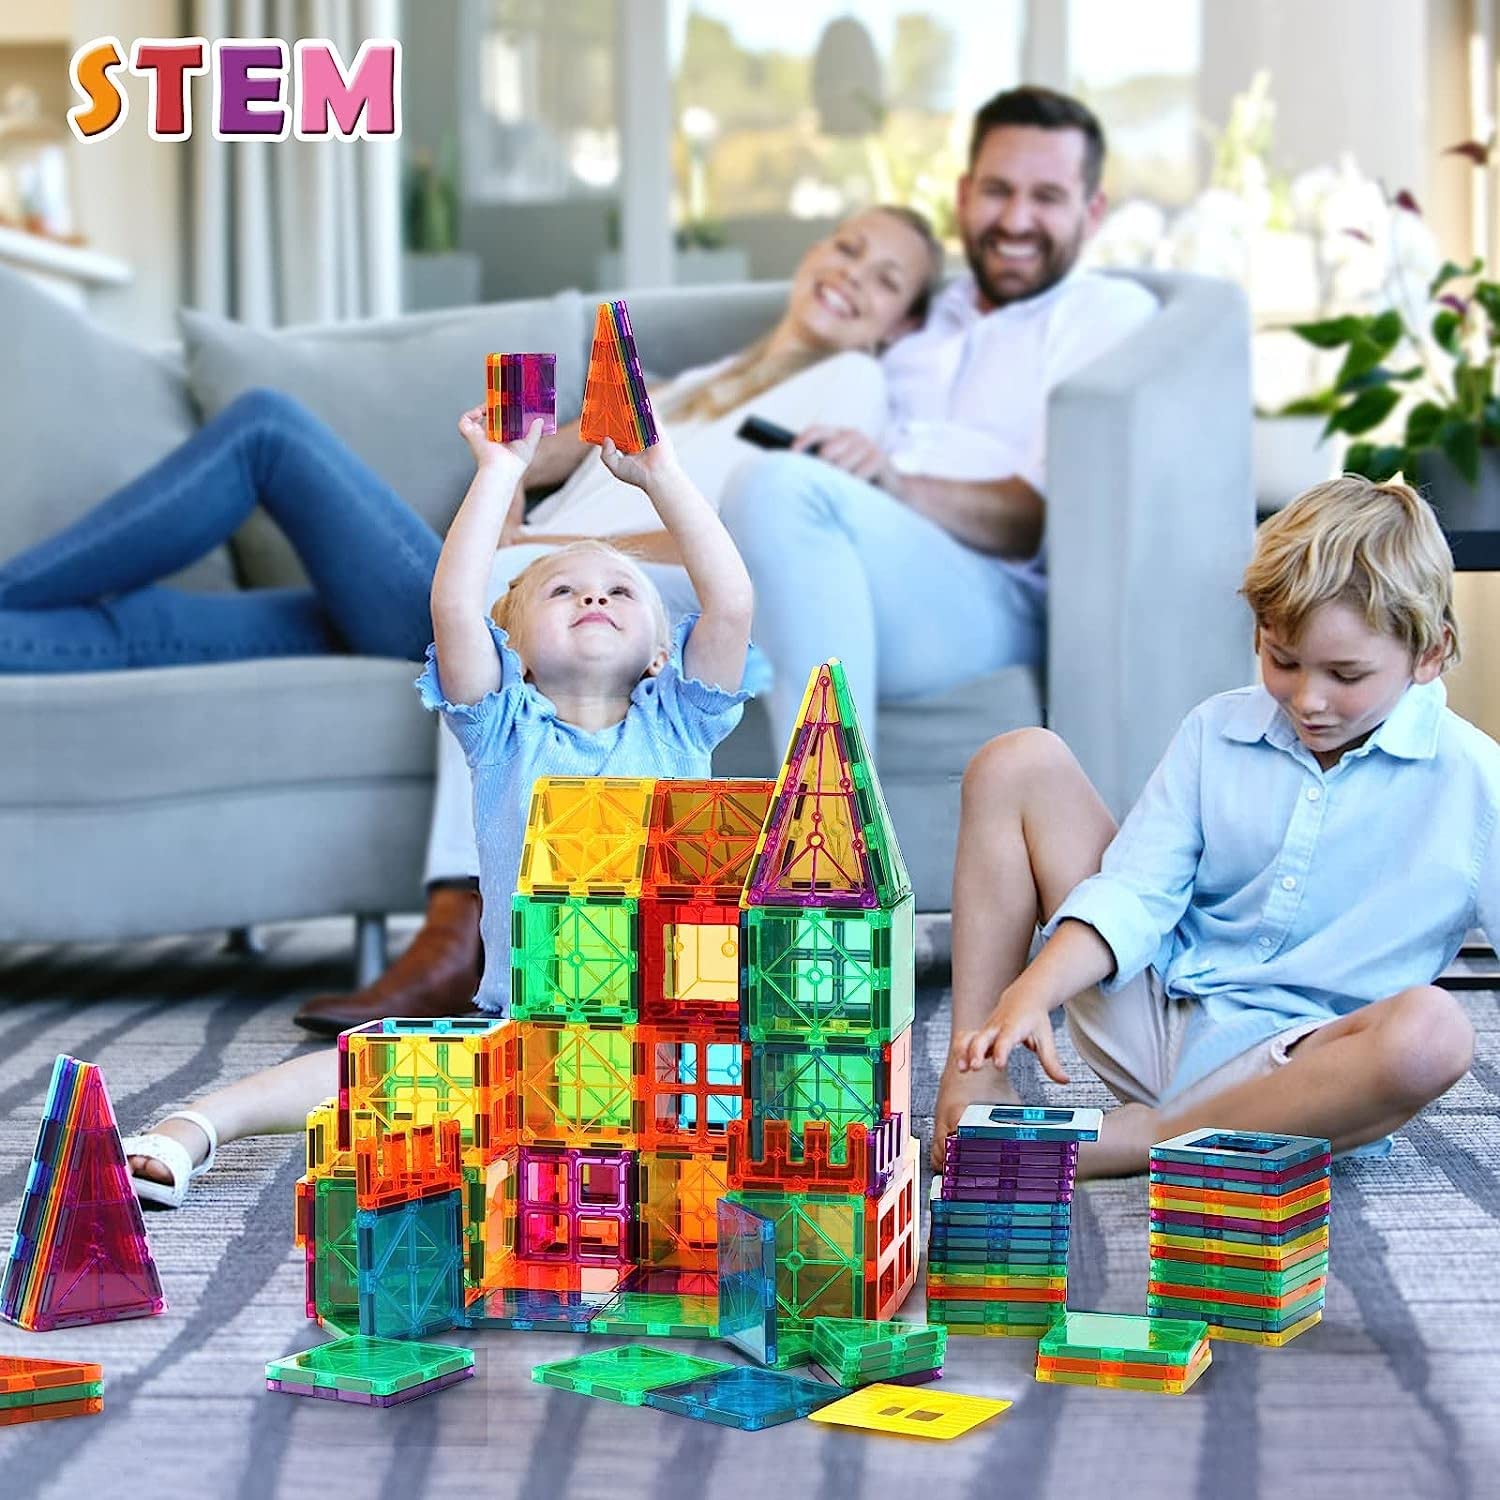 Braintastic 10 Pcs Magnetic Tiles Building Block Constructing and Creative Learning Educational STEM Toy for Kids Boys Girls